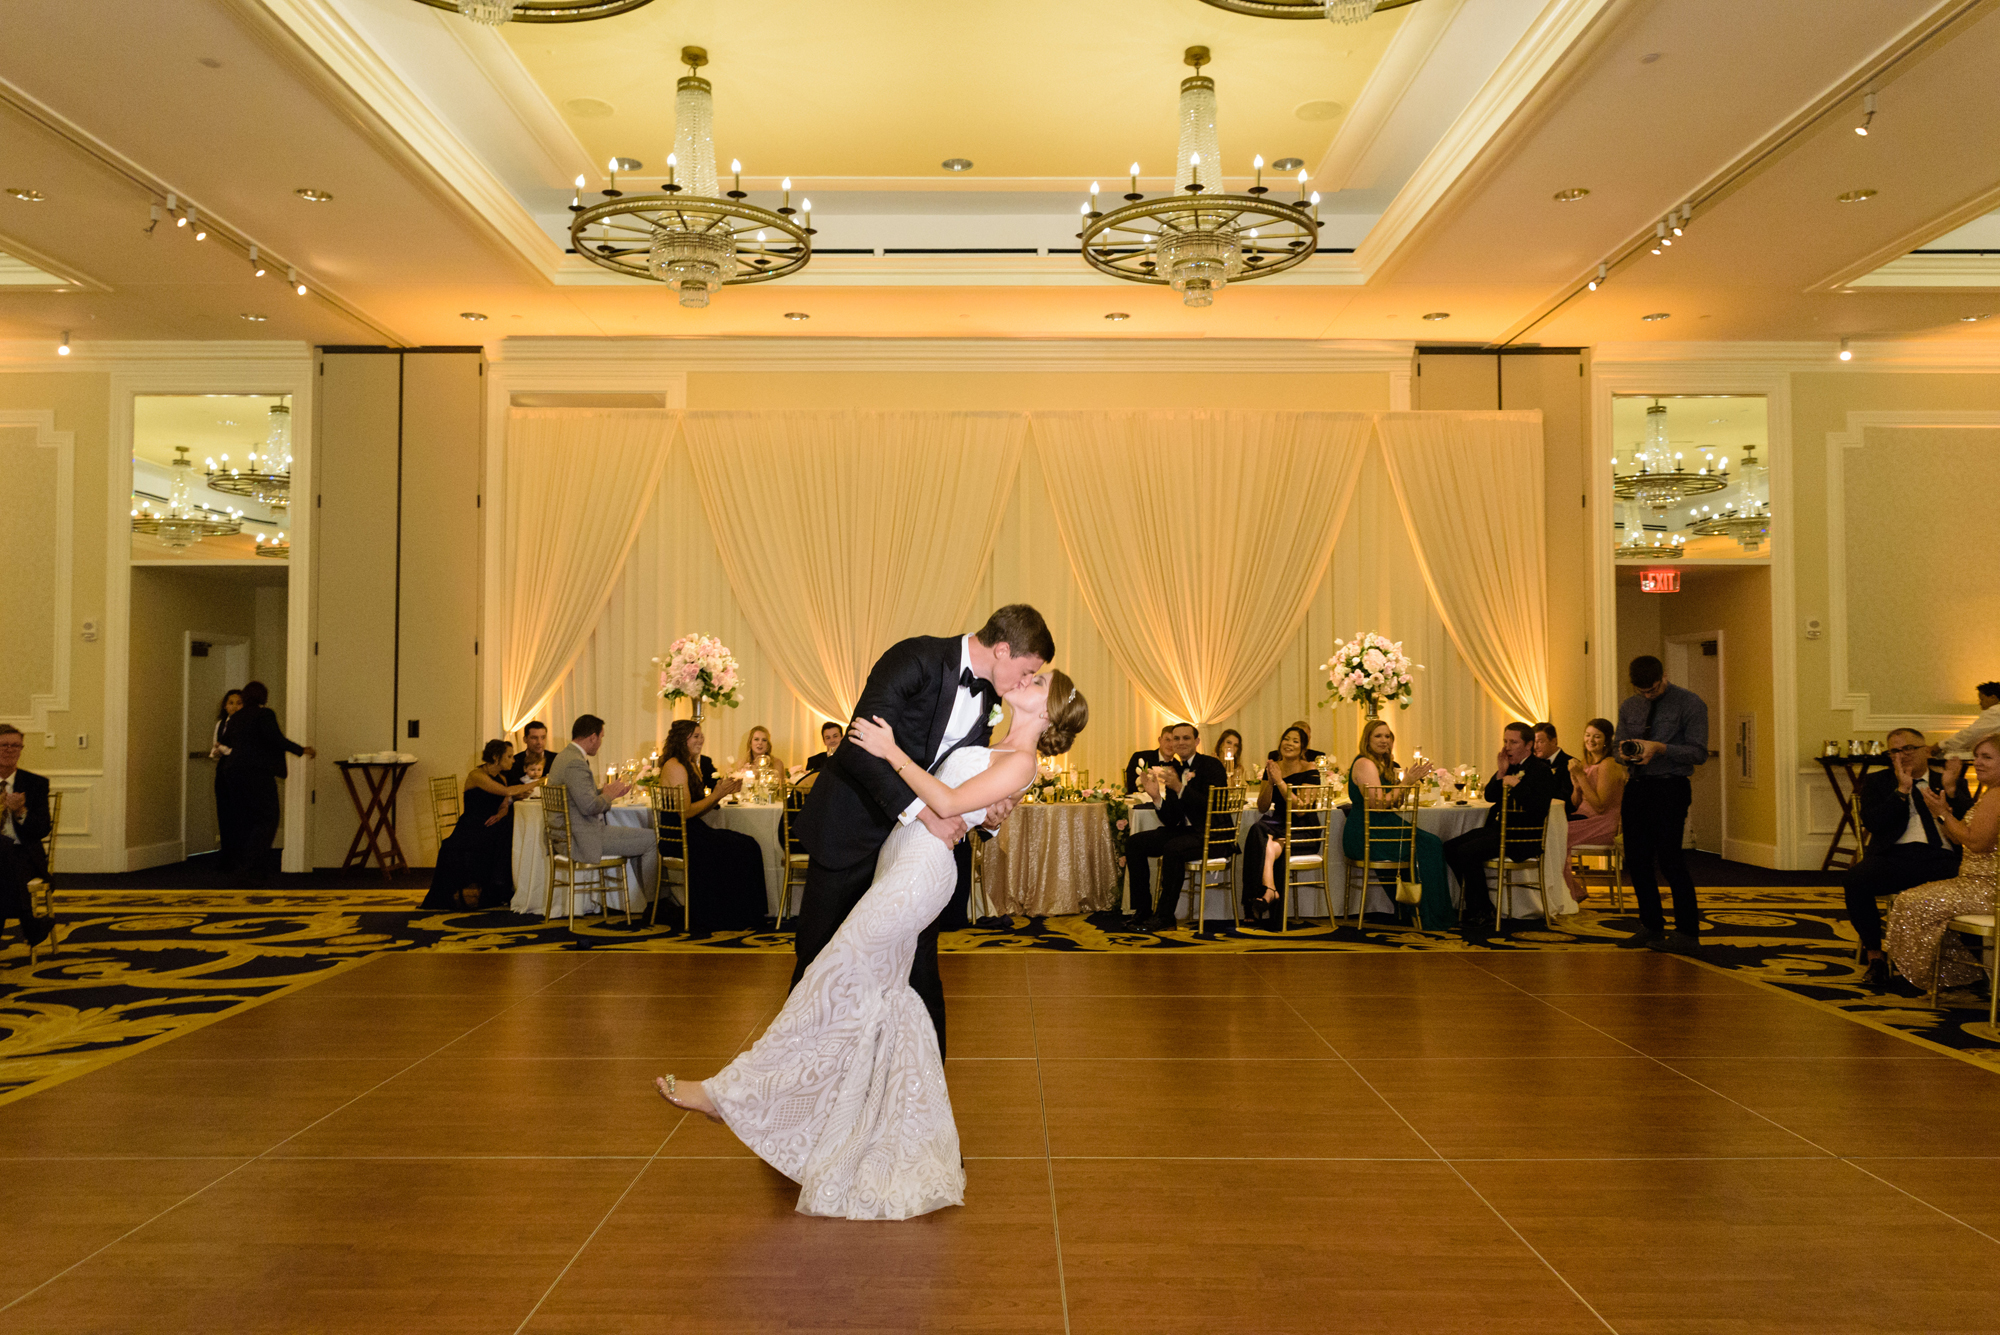 Bride & Groom’s first dance at a Wedding Reception at Morris Inn of Venue ND